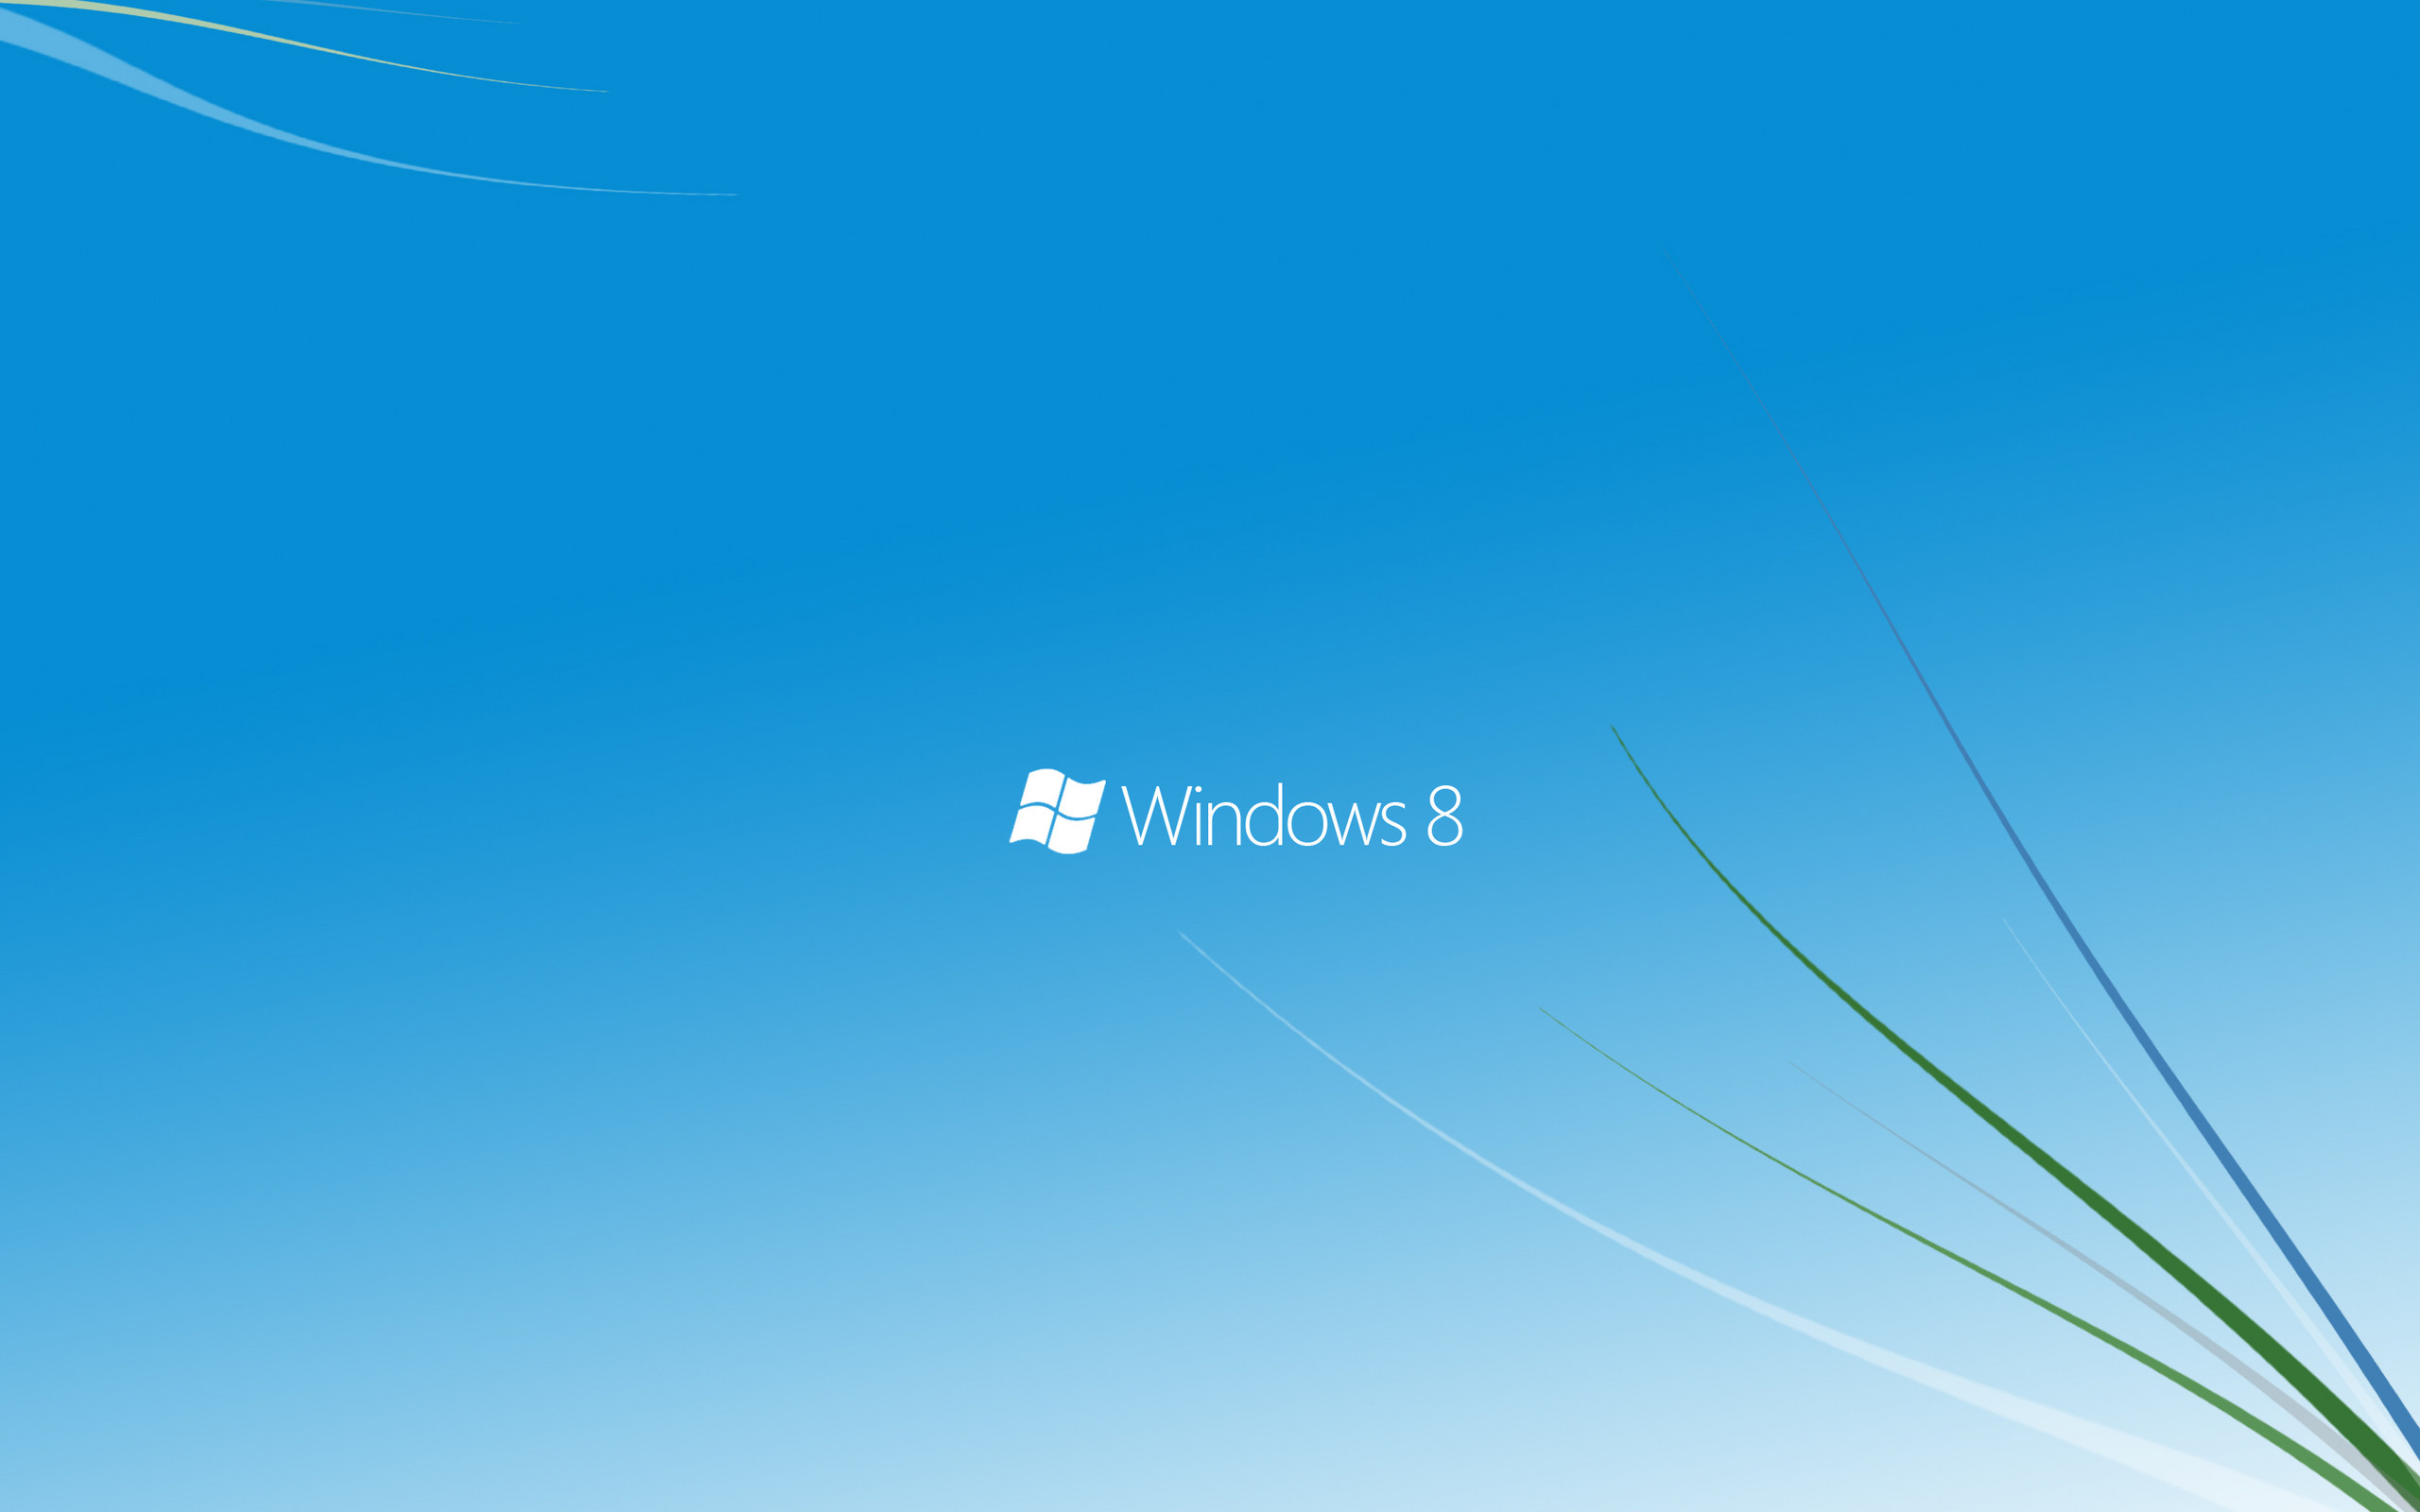 2560x1600 Windows 8 images Windows 8 Wallpapers 6 HD wallpaper and background photos